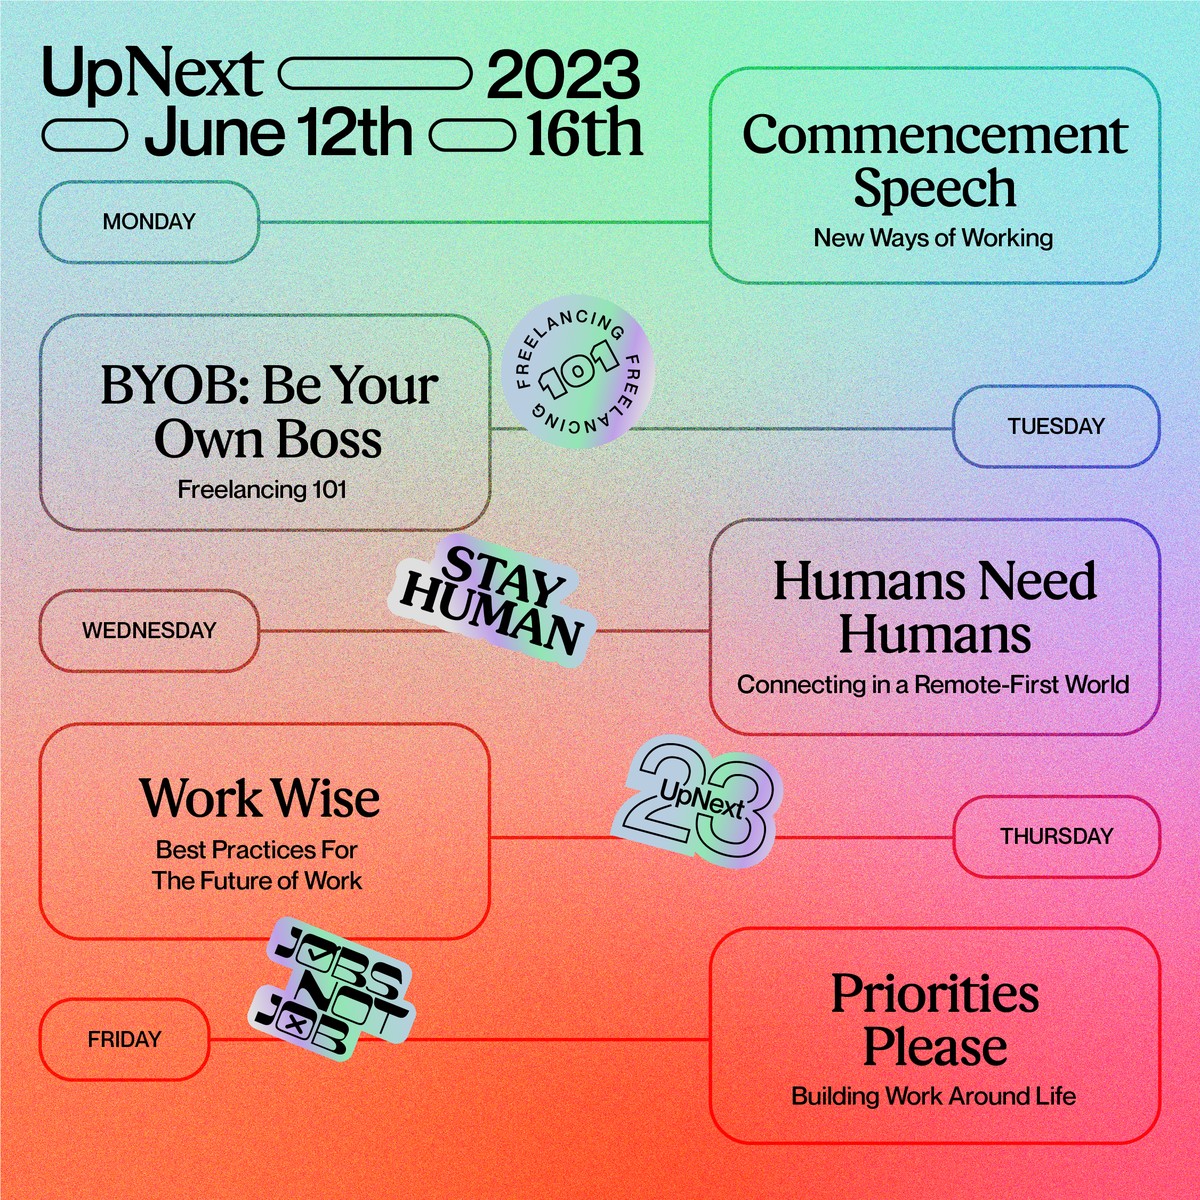 Ready to get started in the future of work? Then you won't want to miss @Upwork's UpNext, a week of speakers, tips, and resources. Tune in to Upwork's social channels starting on June 12.  #UpNext23